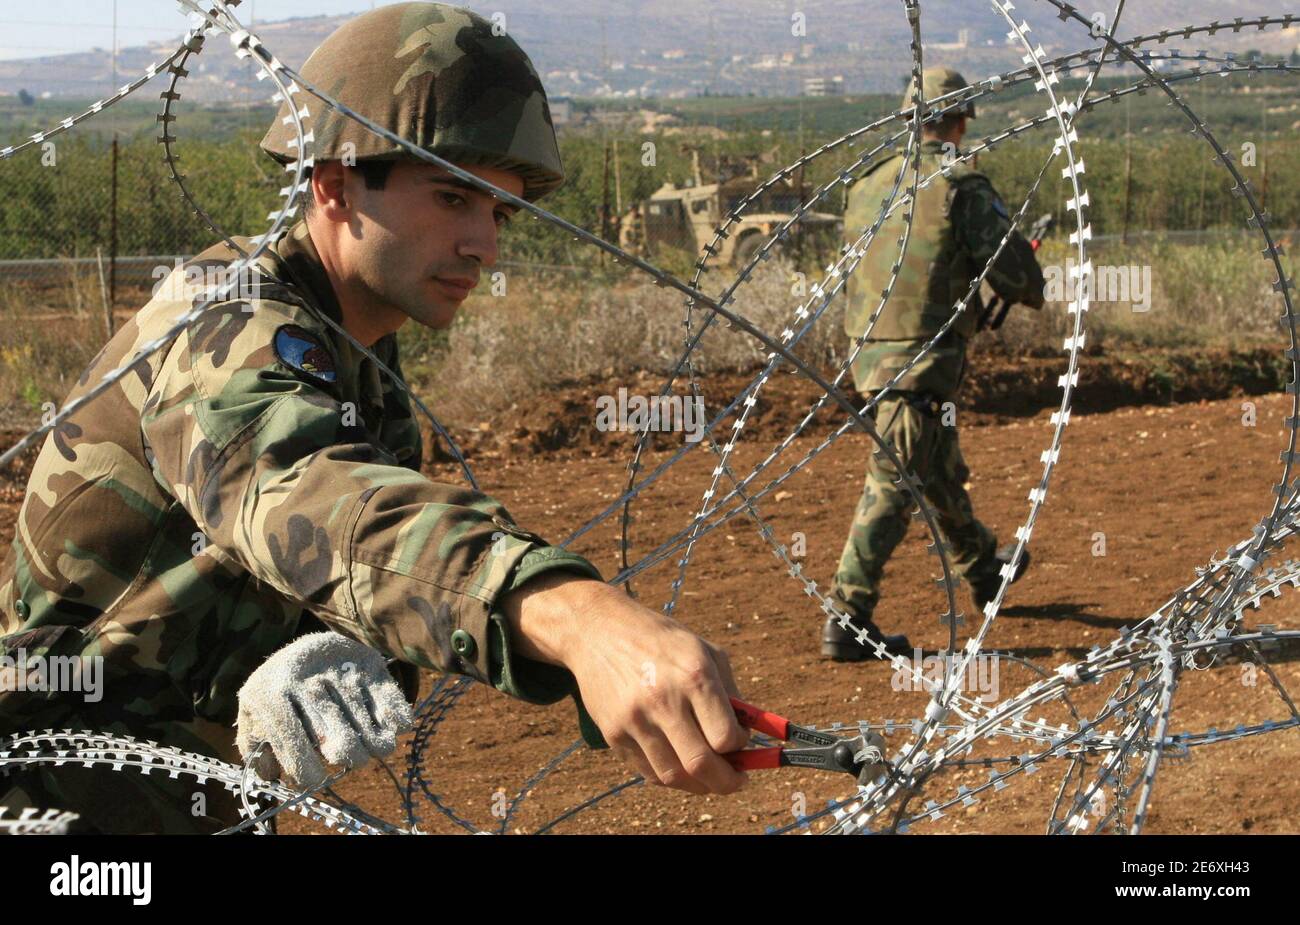 Lebanese soldiers clear away wires as Israeli soldiers in an army vehicle  keep watch (background) along the border with Israel in the Khiam valley in  south Lebanon October 24, 2006. The wires